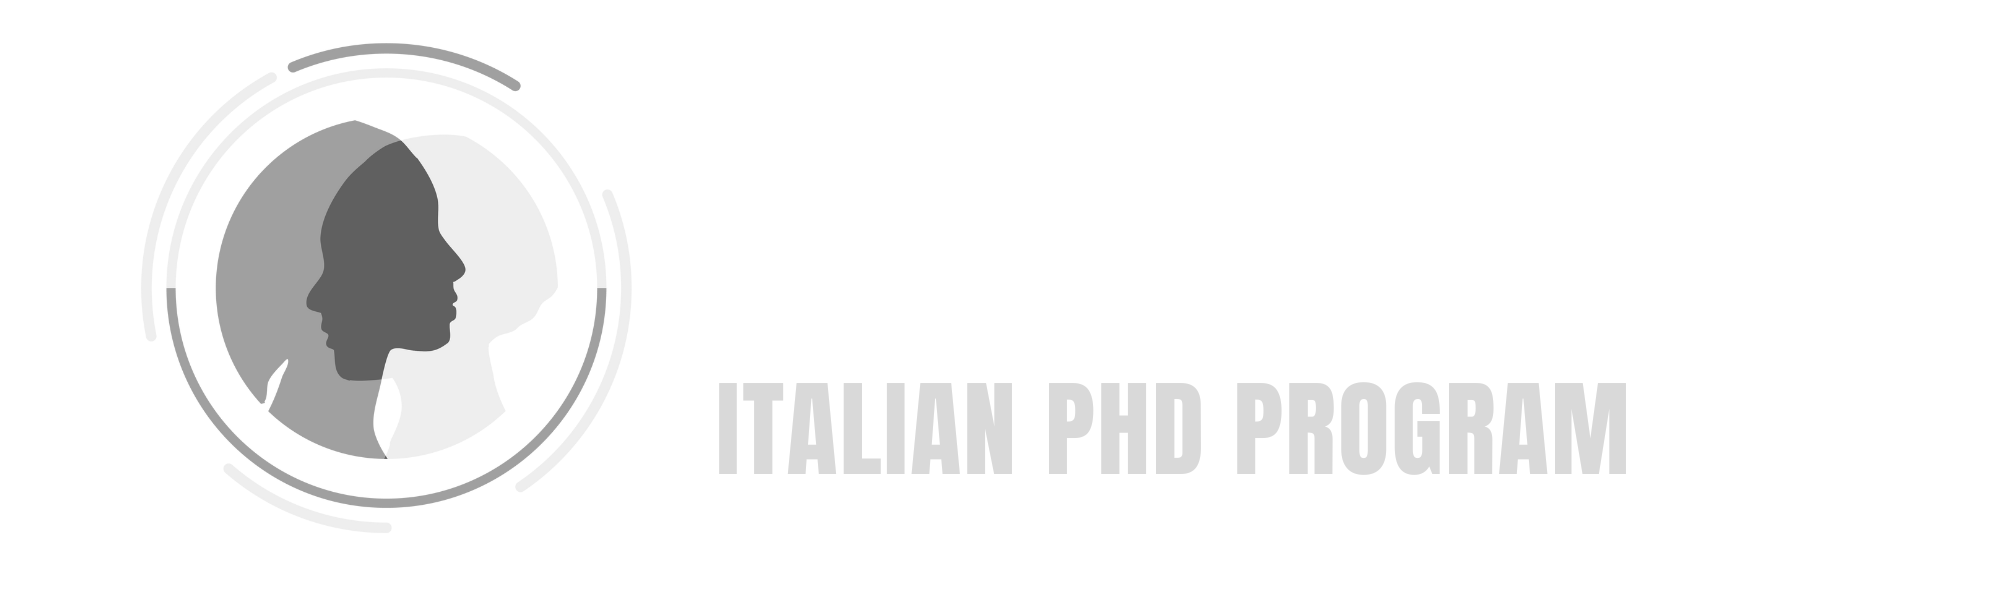 PhD in Learning Sciences and Digital Technologies